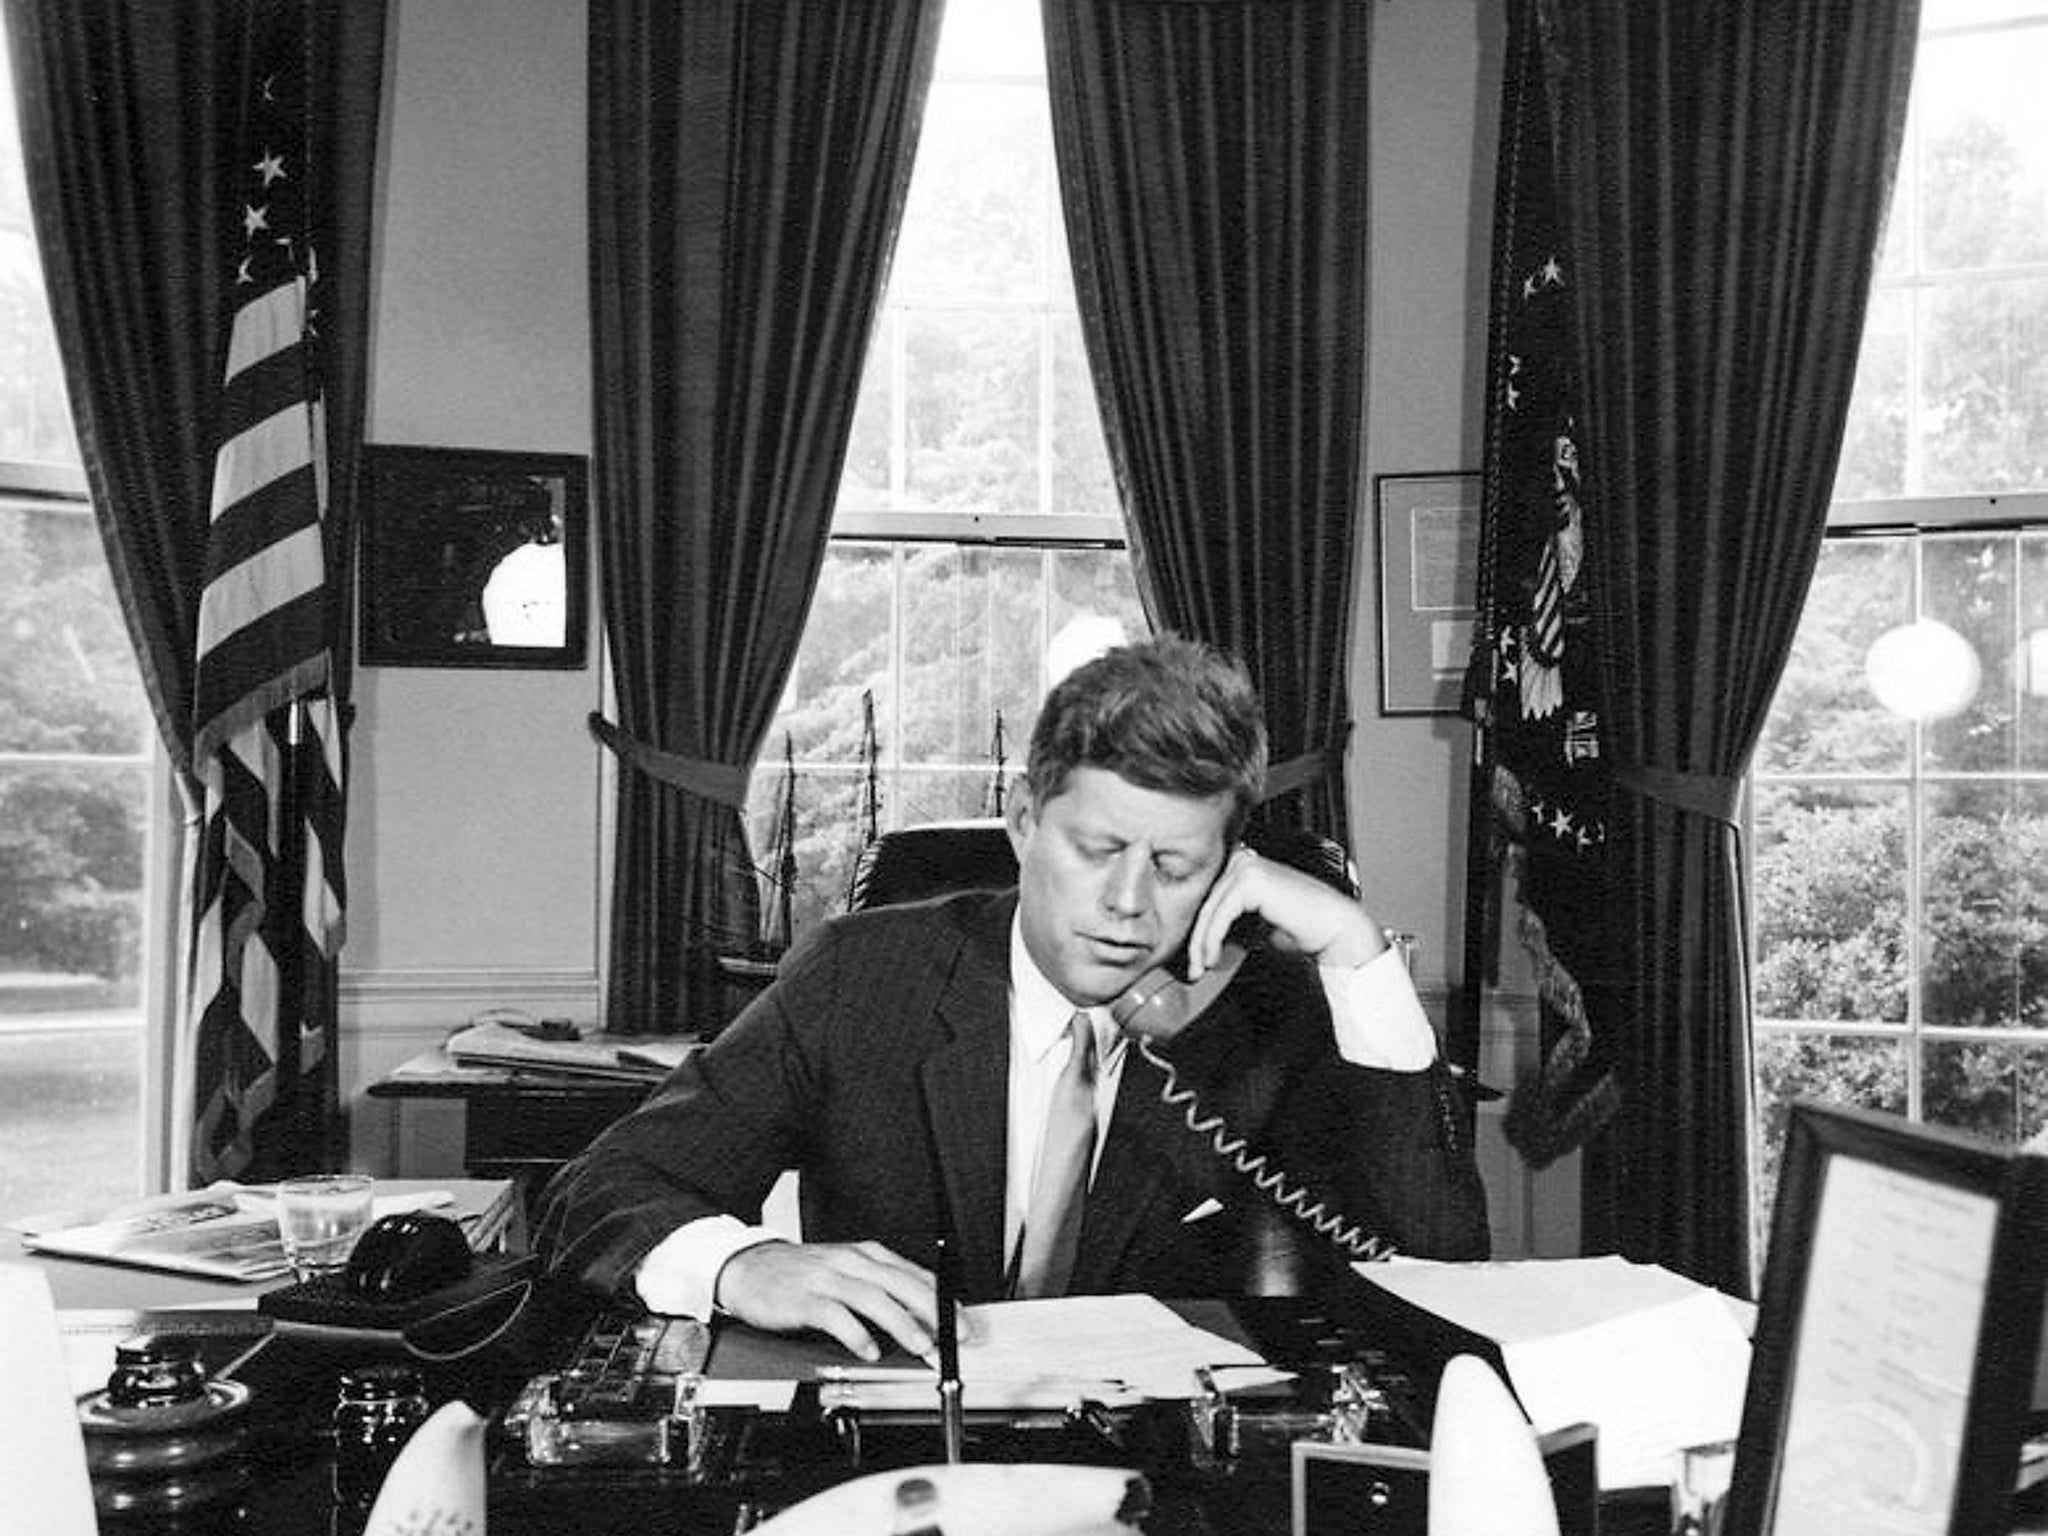 JFK in the Oval Office in 1962: without him, there would have been no Clinton, Obama, Blair or even Cameron